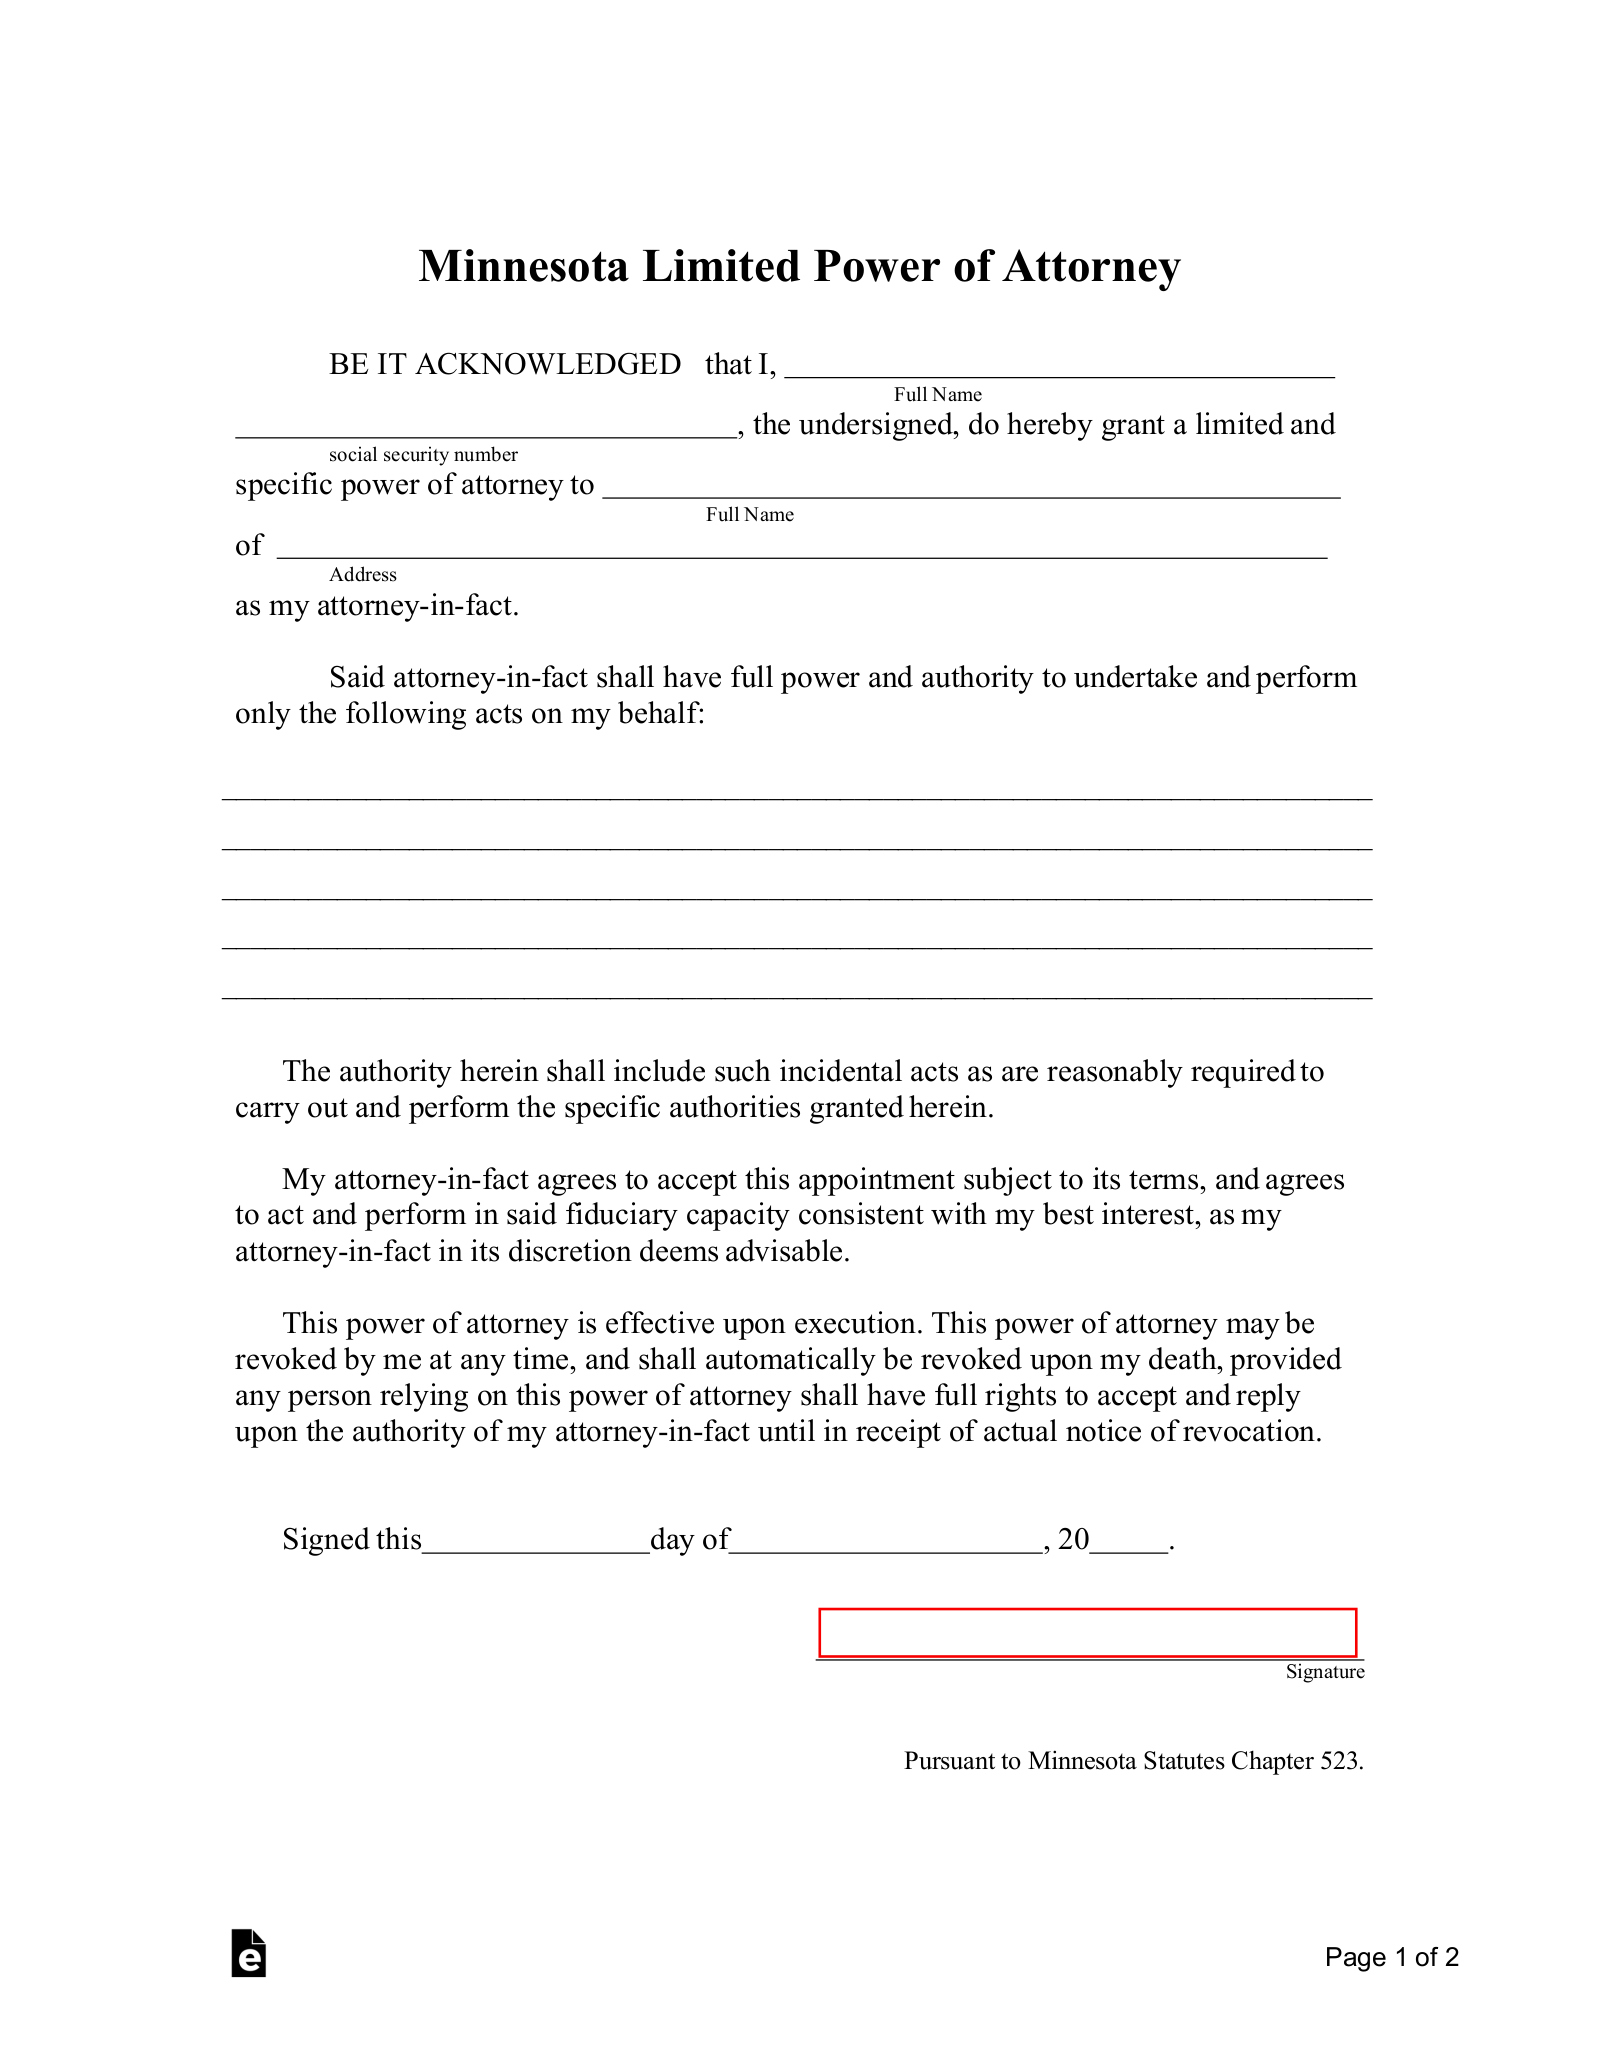 Minnesota Limited Power of Attorney Form